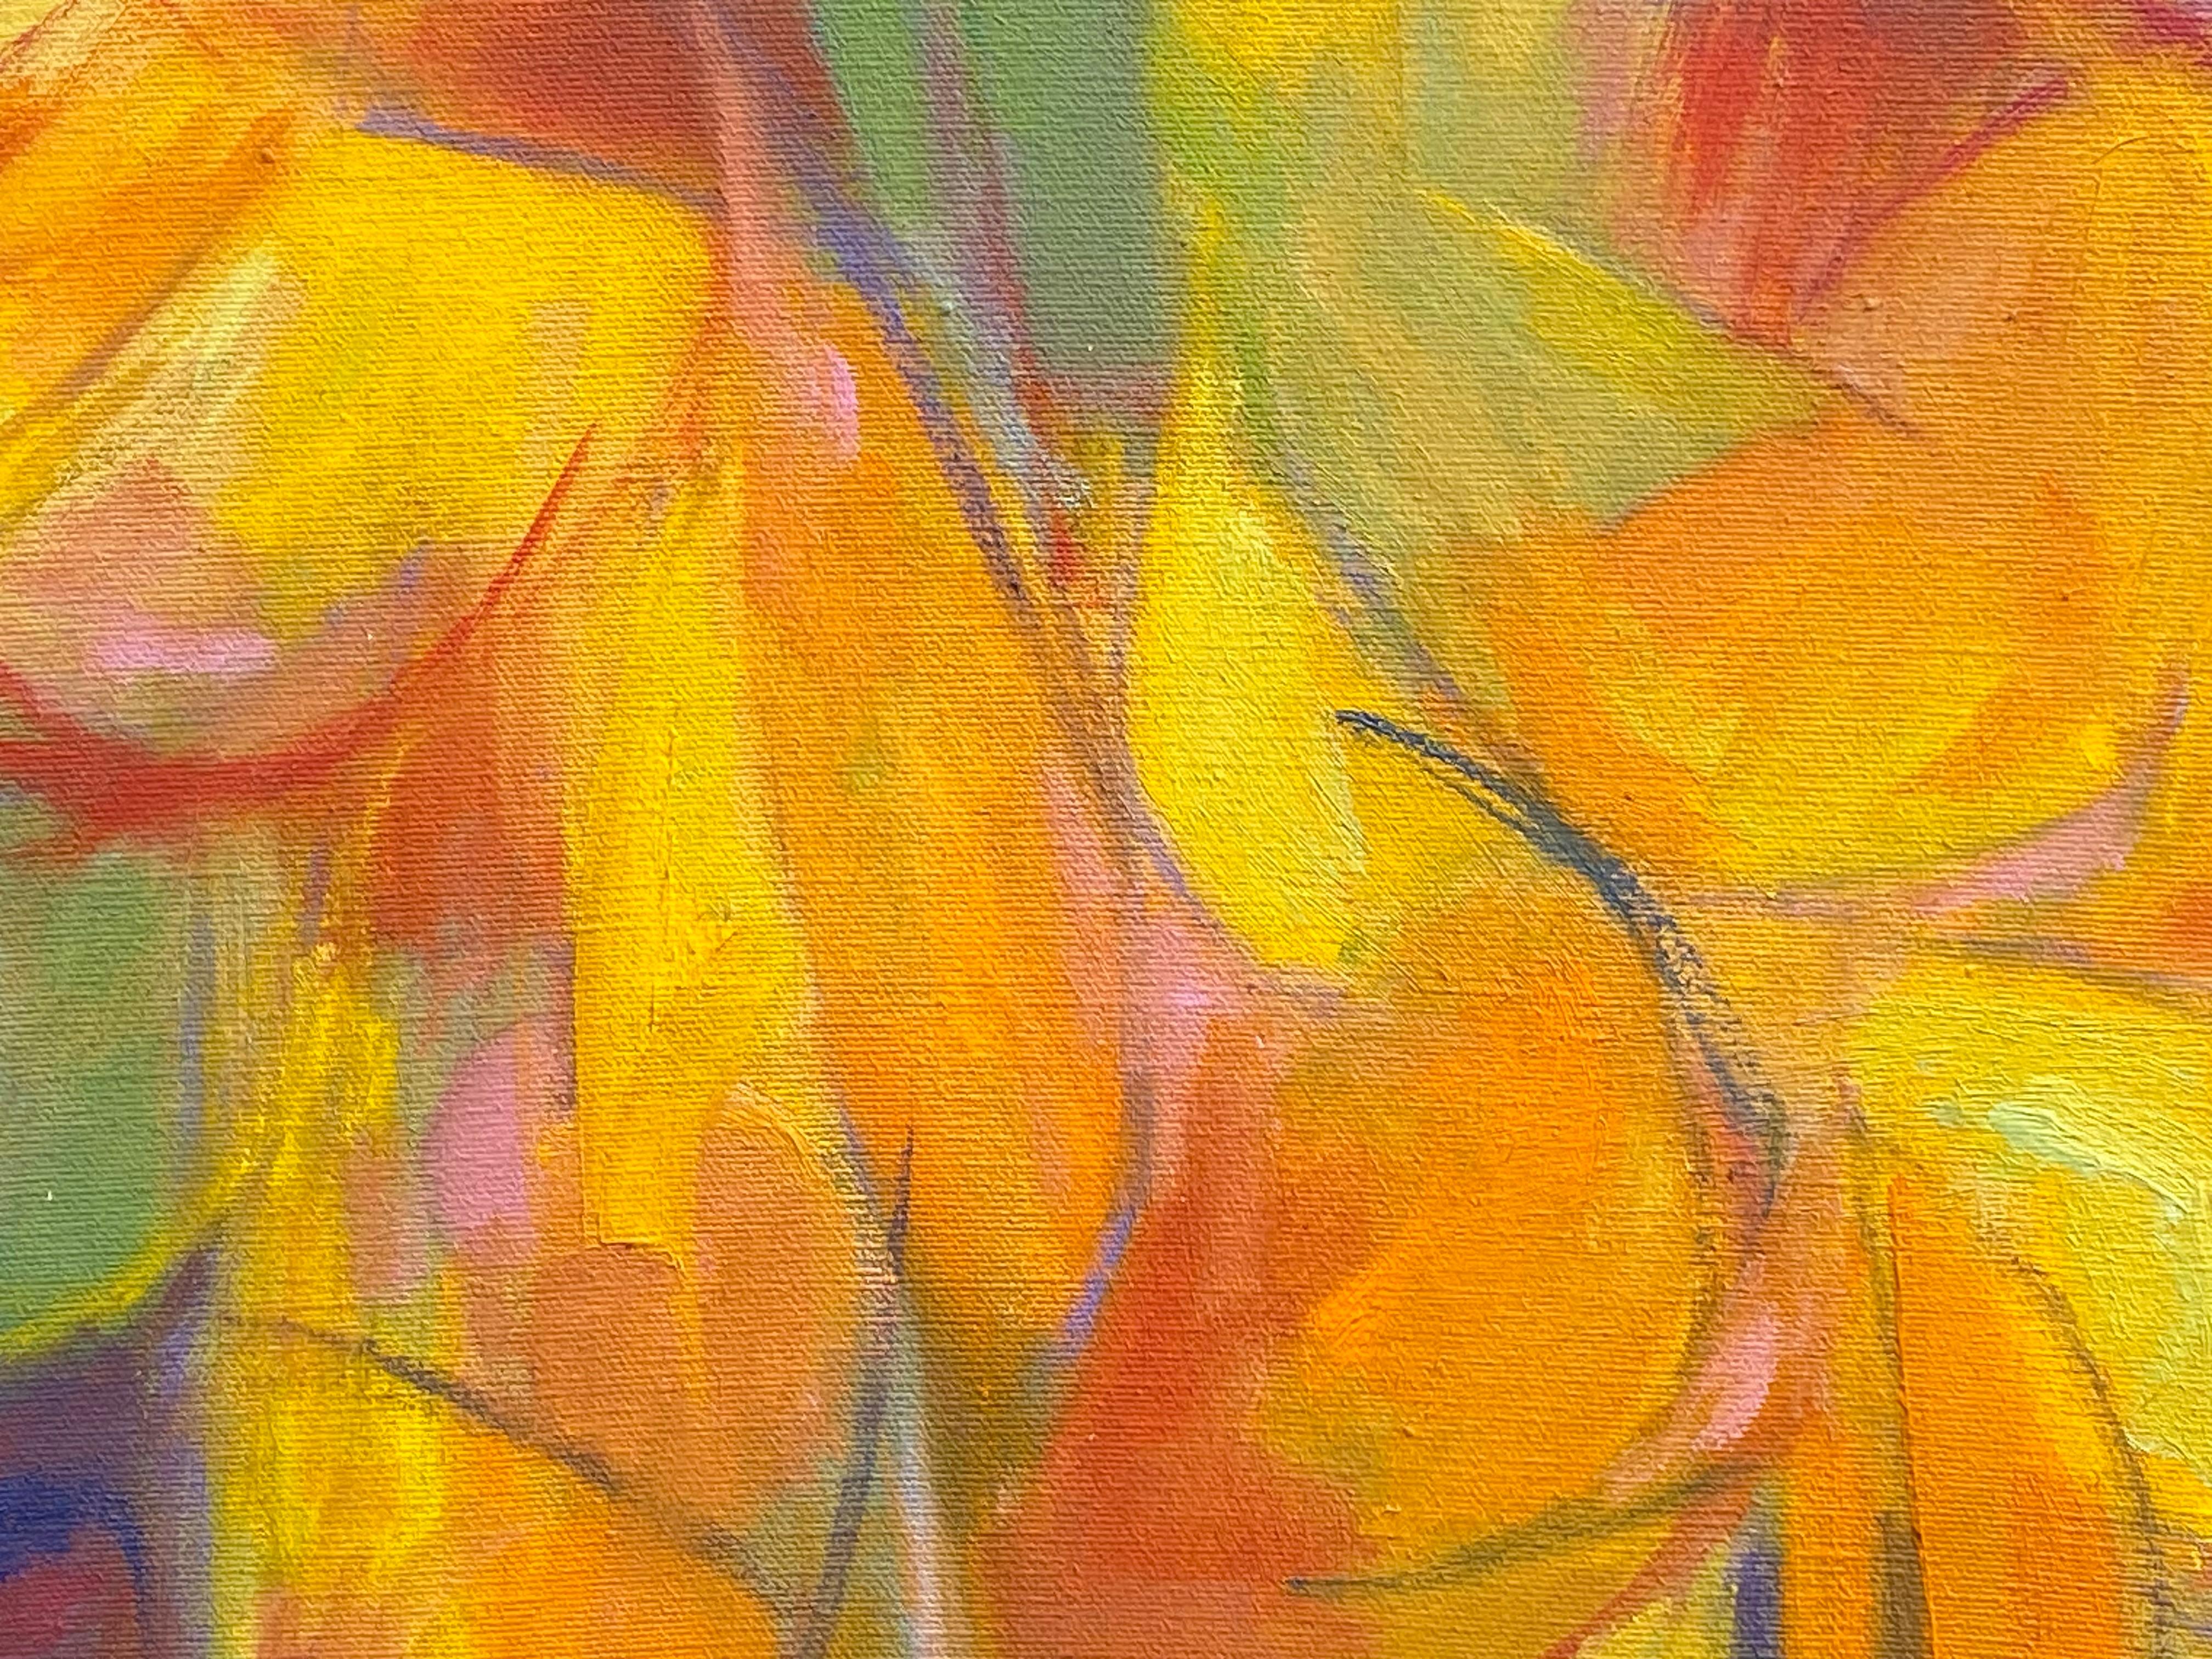 “Oranges” - Contemporary Painting by Clifford Johnson